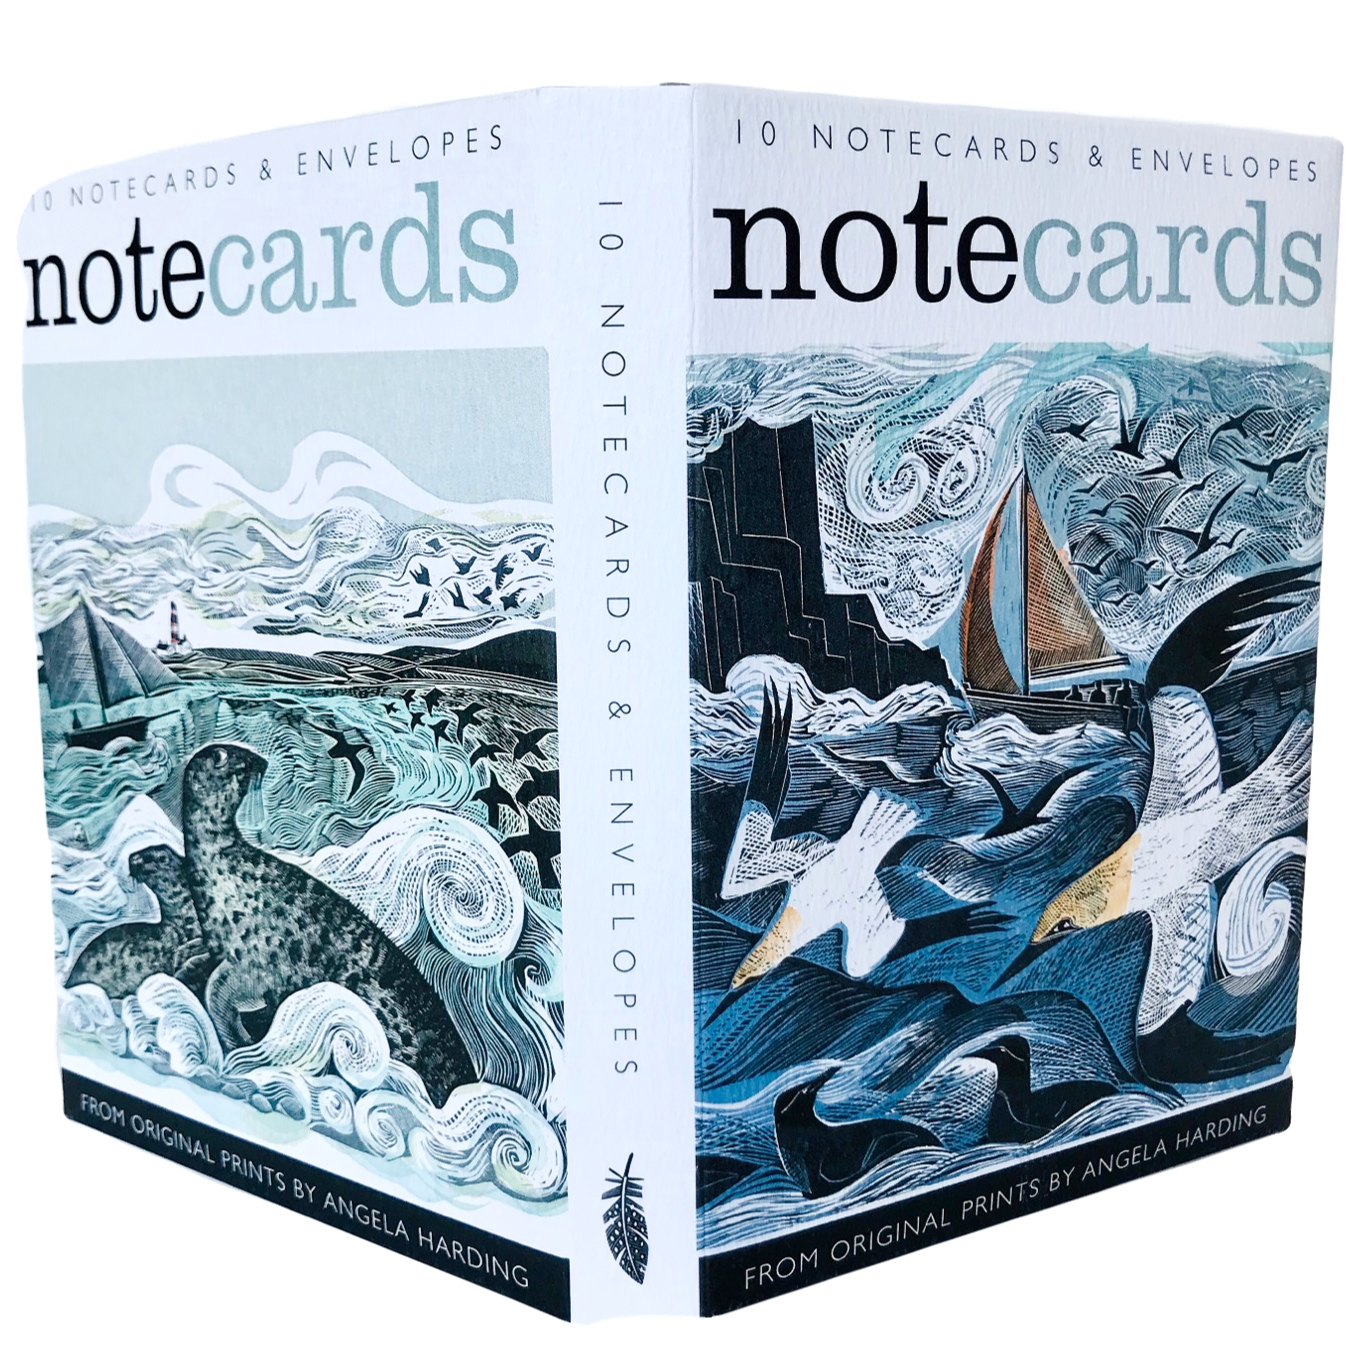 10 Sea Notecards and Envelopes by Angela Harding